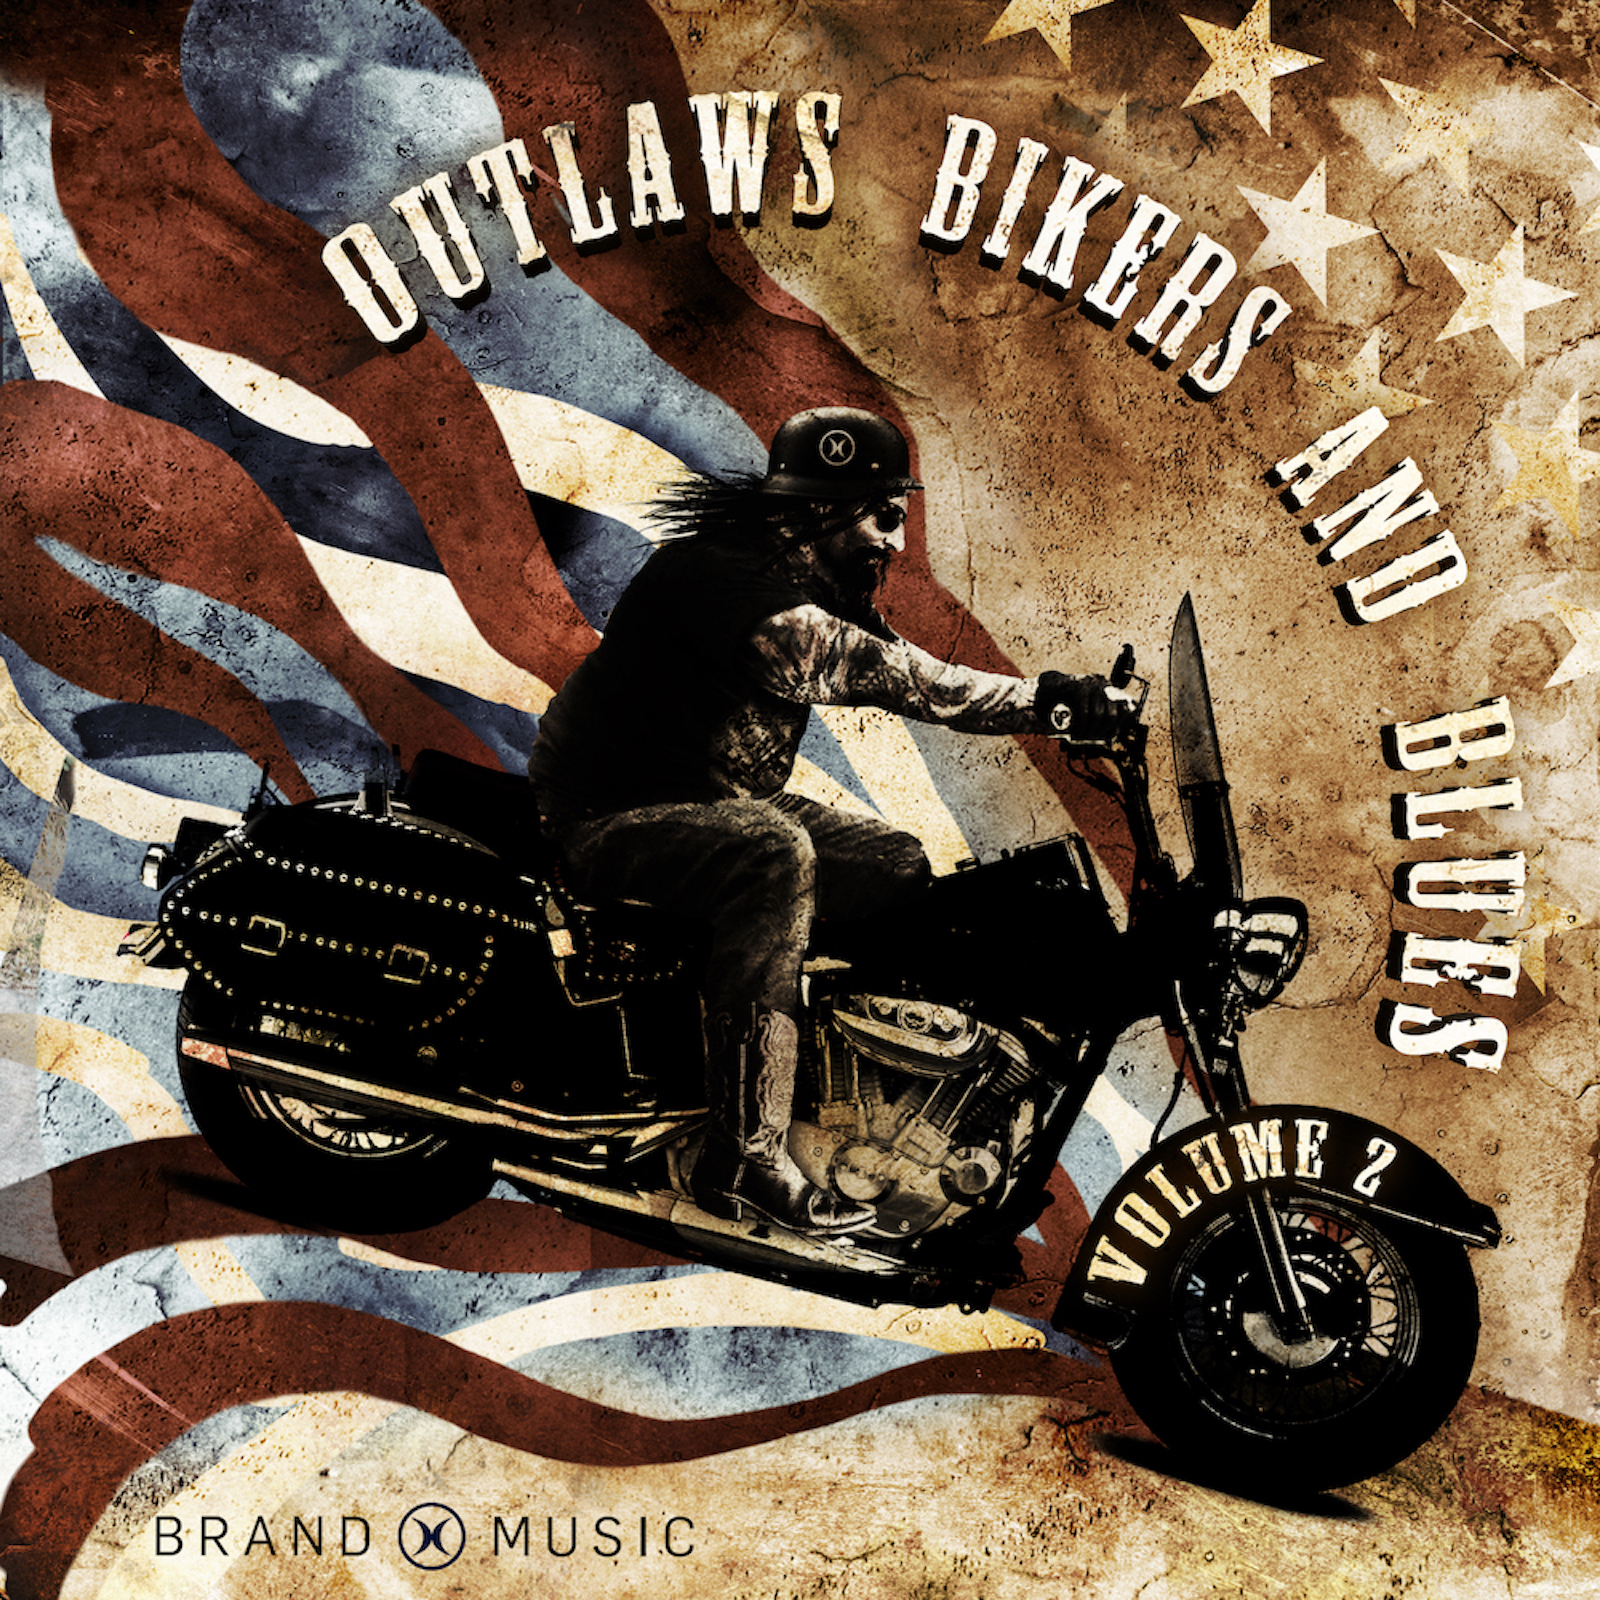 Outlaws Bikers and Blues Volume 2